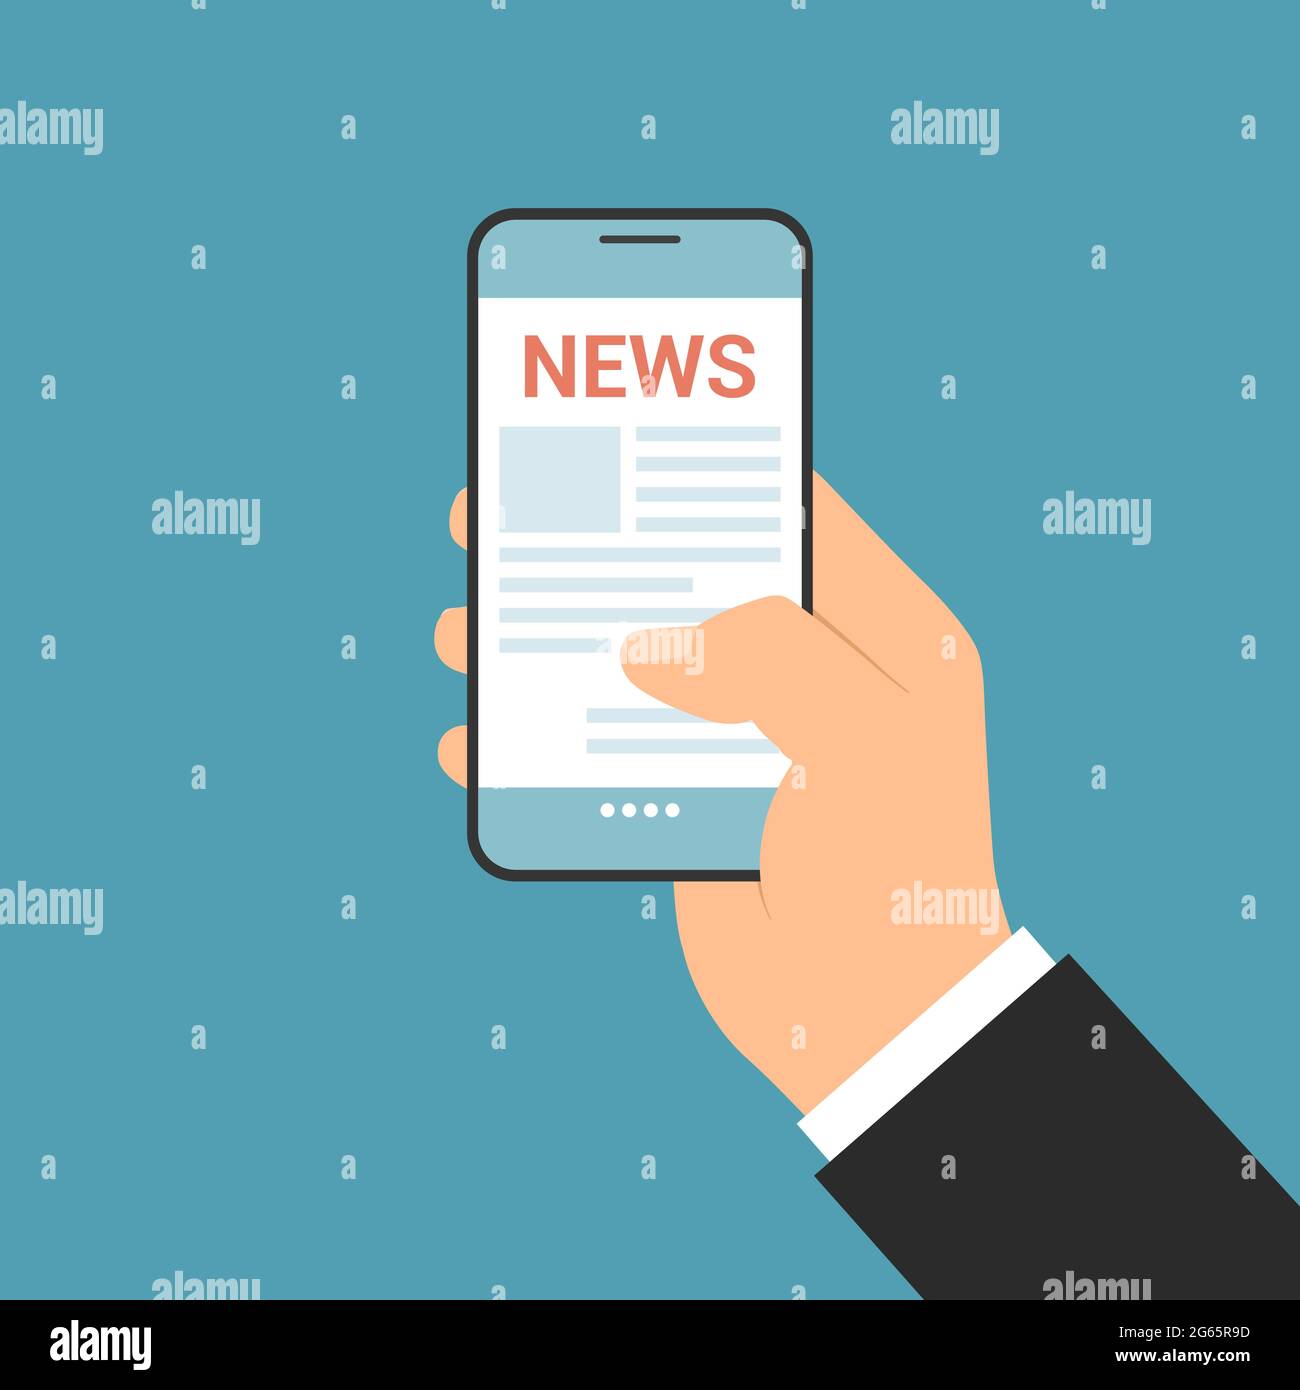 Flat design illustration of manager hand holding smartphone with news application. Reading headline and text - vector Stock Vector